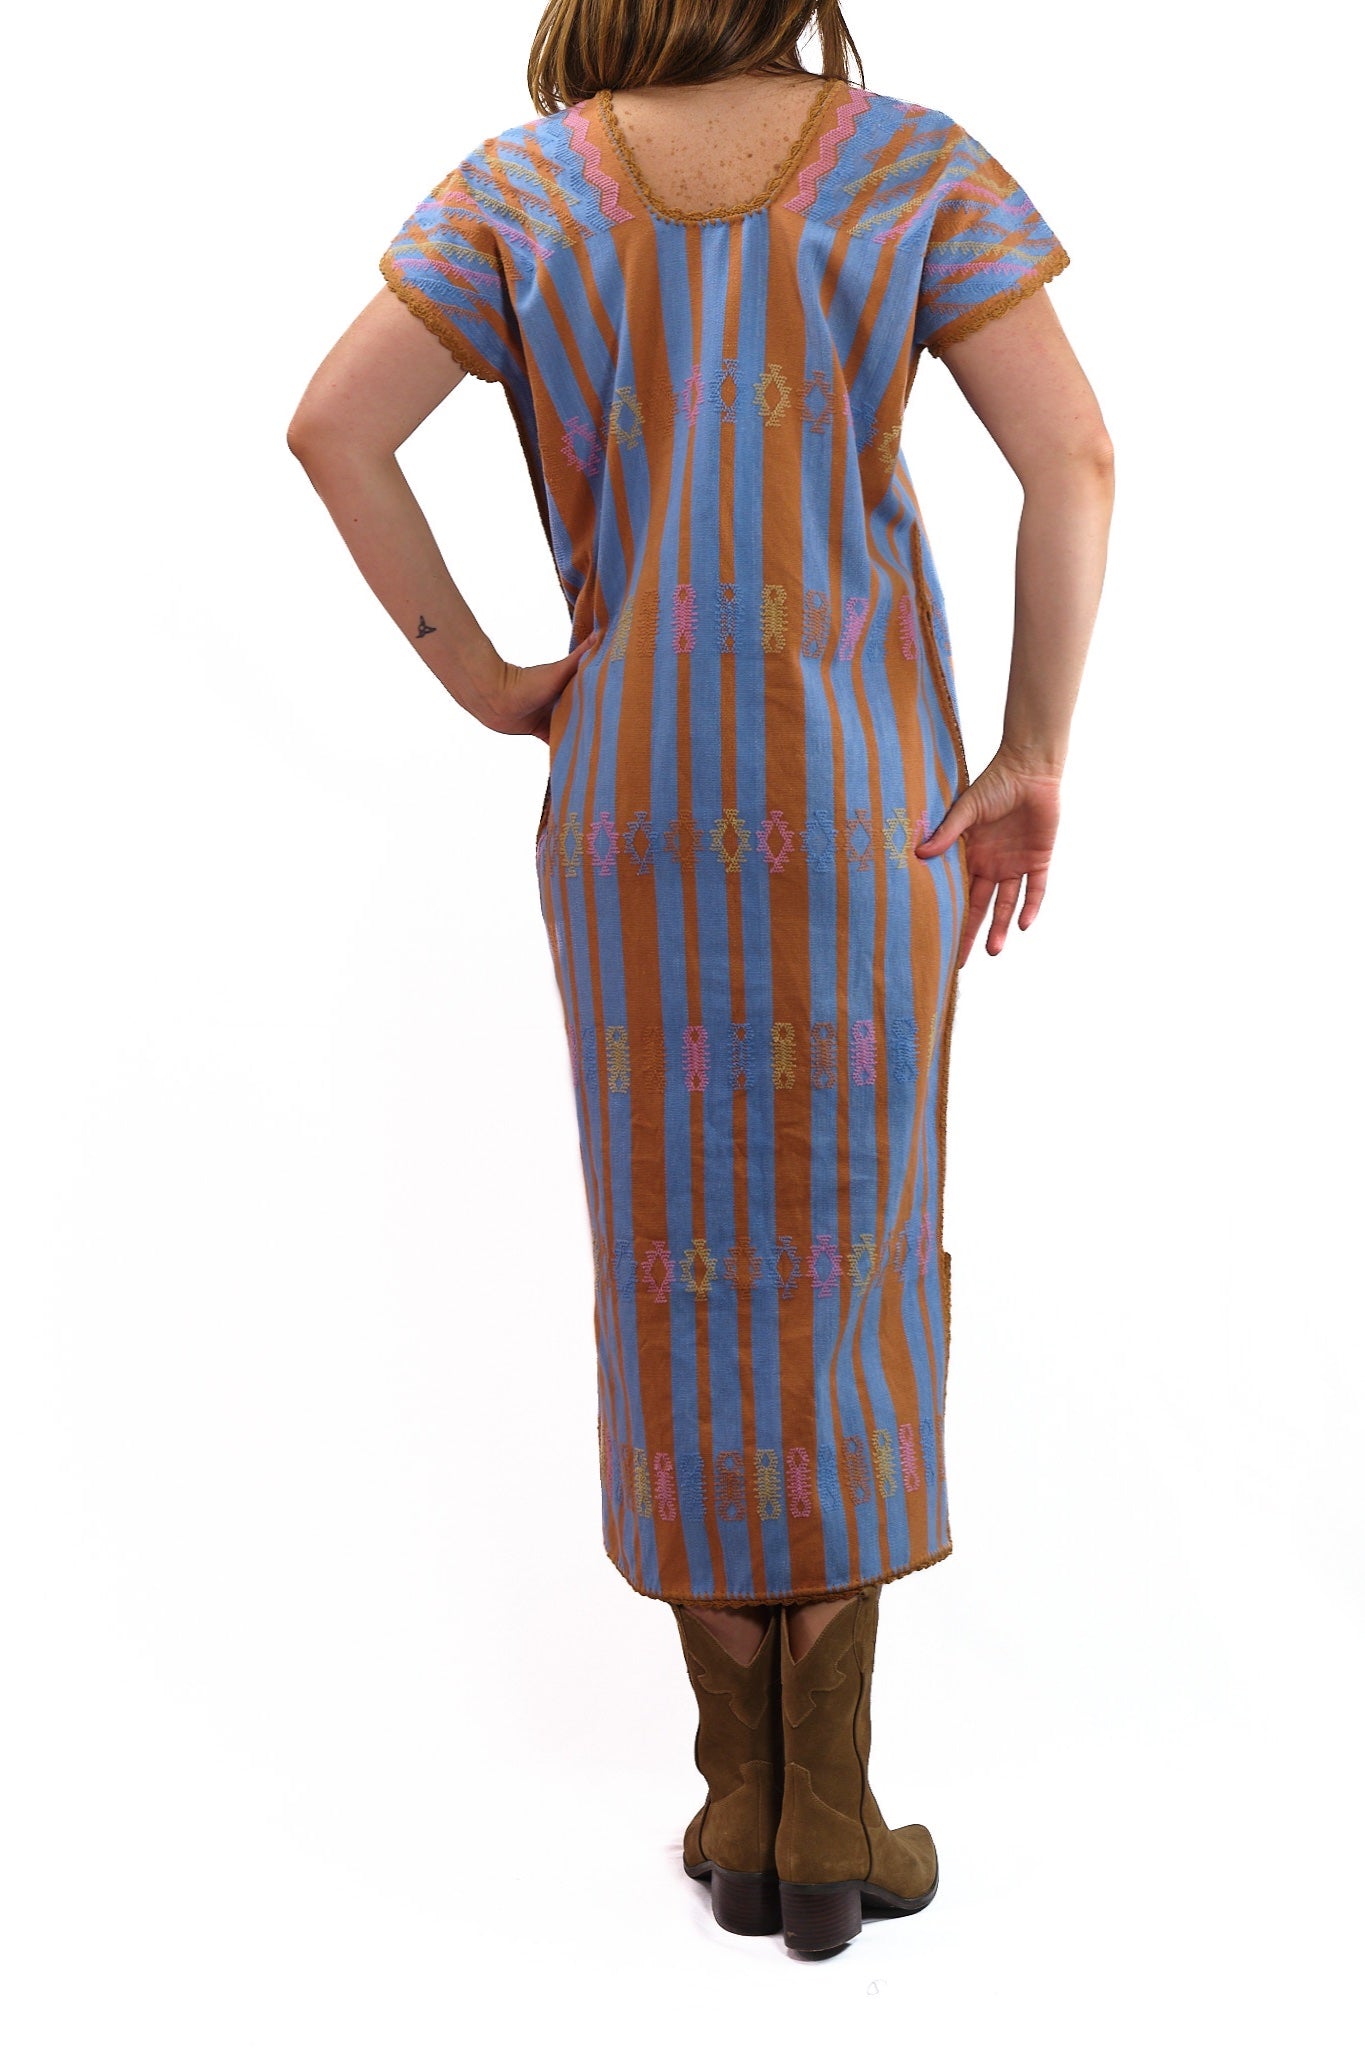 Huipil Dress San Juan blue and brown striped with multicolor brocade